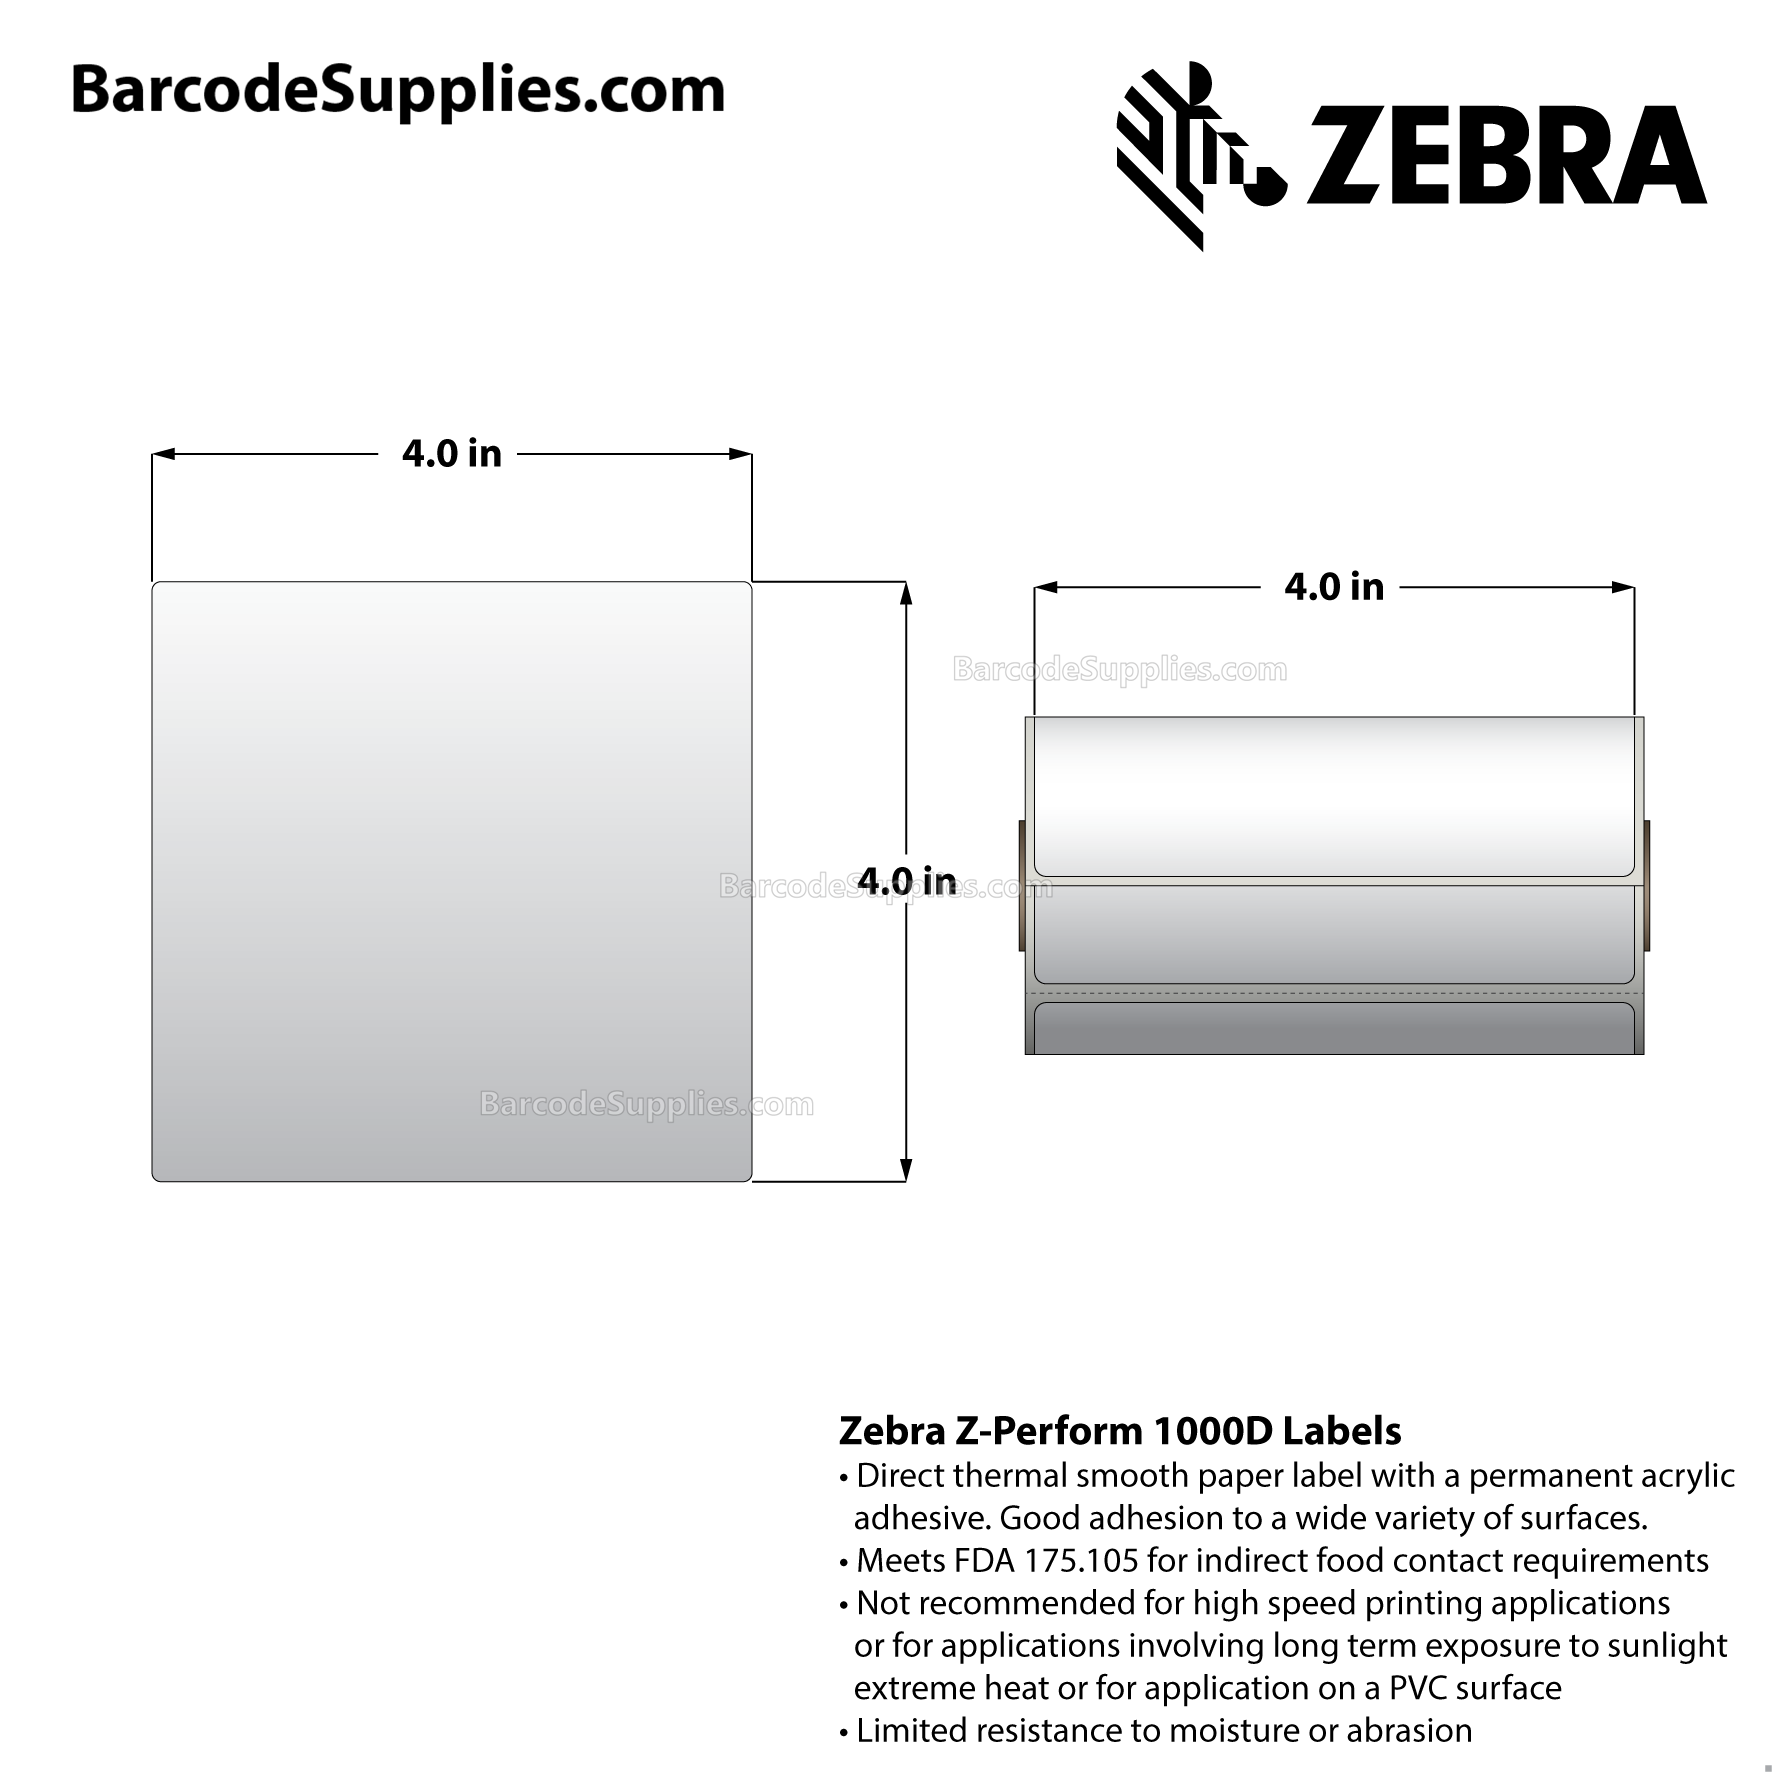 4 x 4 Direct Thermal White Z-Perform 1000D Labels With Permanent Adhesive - Perforated - 120 Labels Per Roll - Carton Of 36 Rolls - 4320 Labels Total - MPN: 10026374